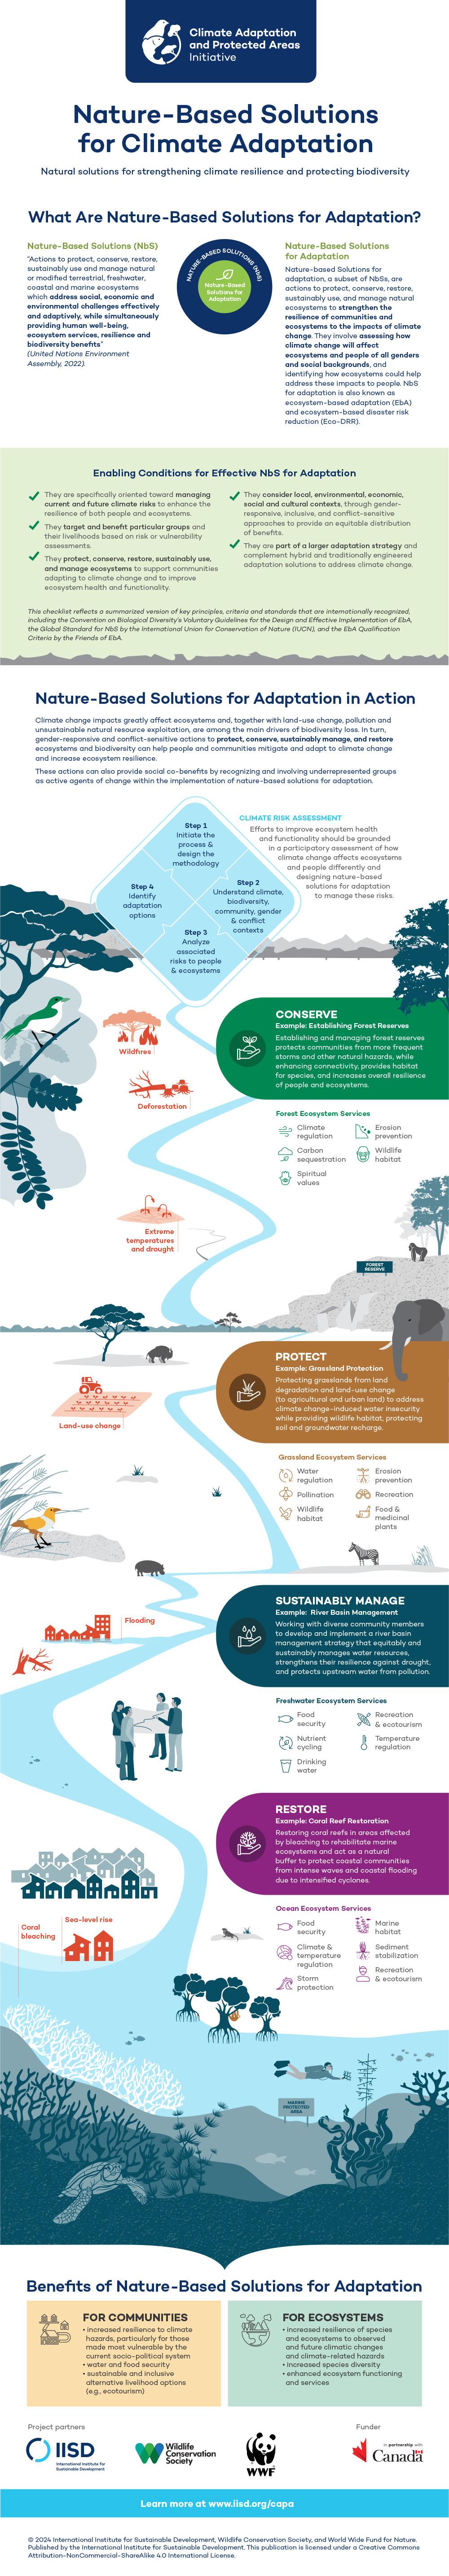 CAPA Initiative Nature-Based Solutions for Climate Adaptation poster